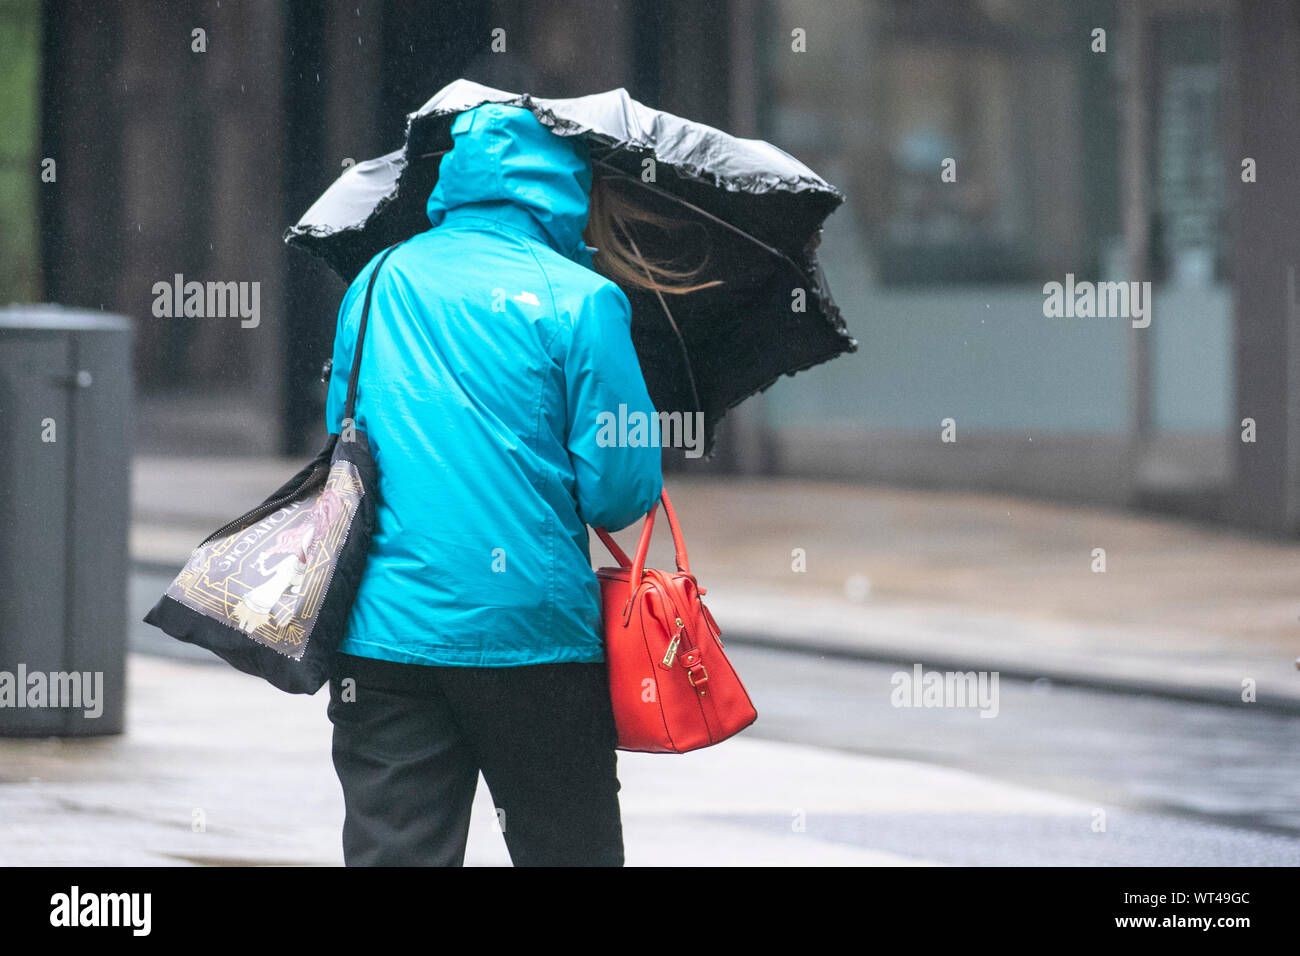 Rainy day in Preston, Lancashire.  September, 2019. UK Weather: Blustry start to the day with heavy showers in the city centre, and shoppers and commuters head for the retail sector as the remains of Tropical Storm Gabrielle arrive to the UK and this and this will bring further outbreaks of rain across western parts of the country. Credit: MediaWorldImages/Alamy Live News Stock Photo